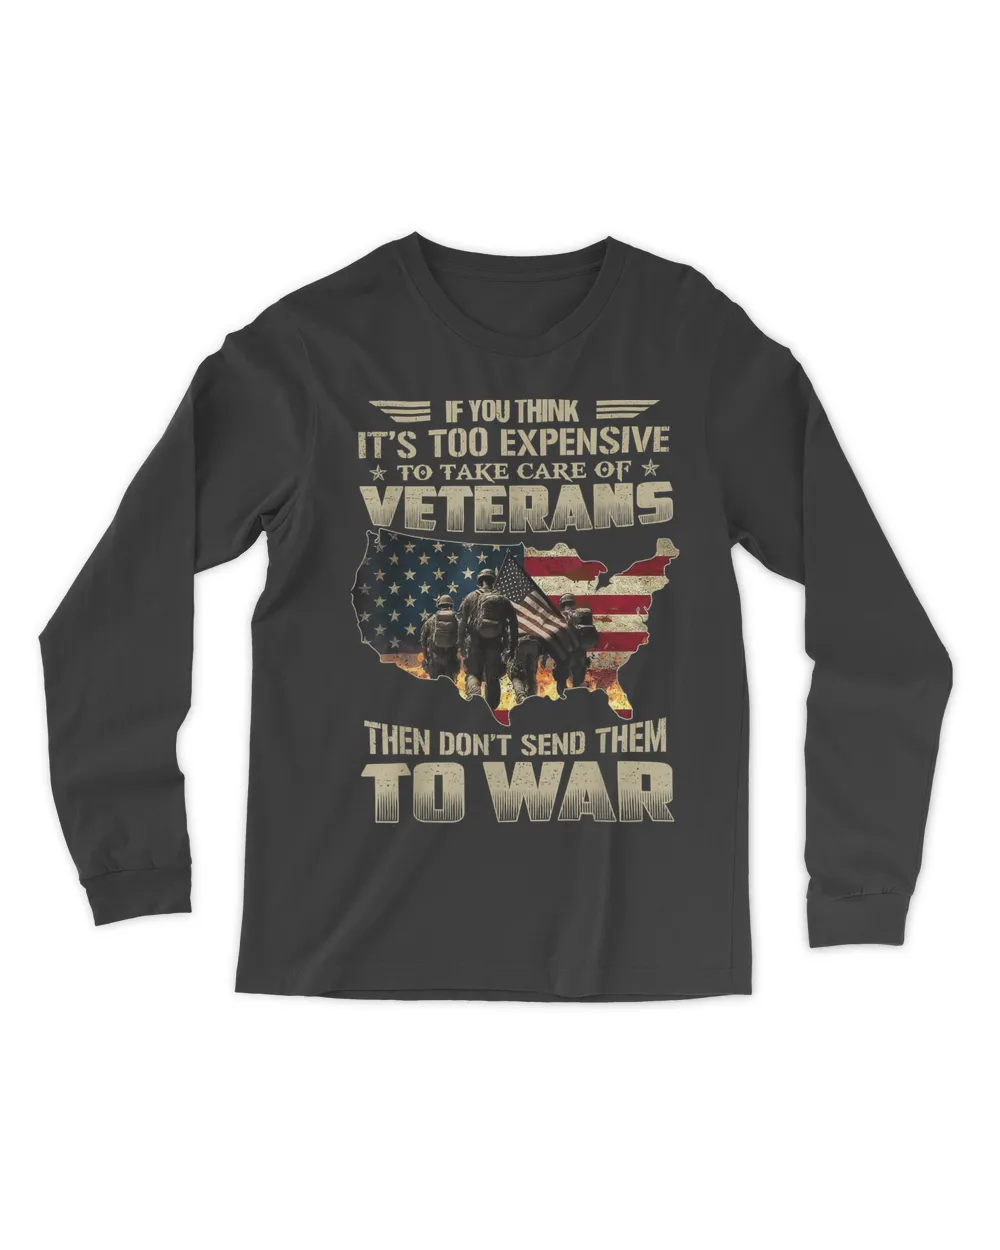 If You Think It's Too Expensive To Take Care Of Veterans T-Shirt